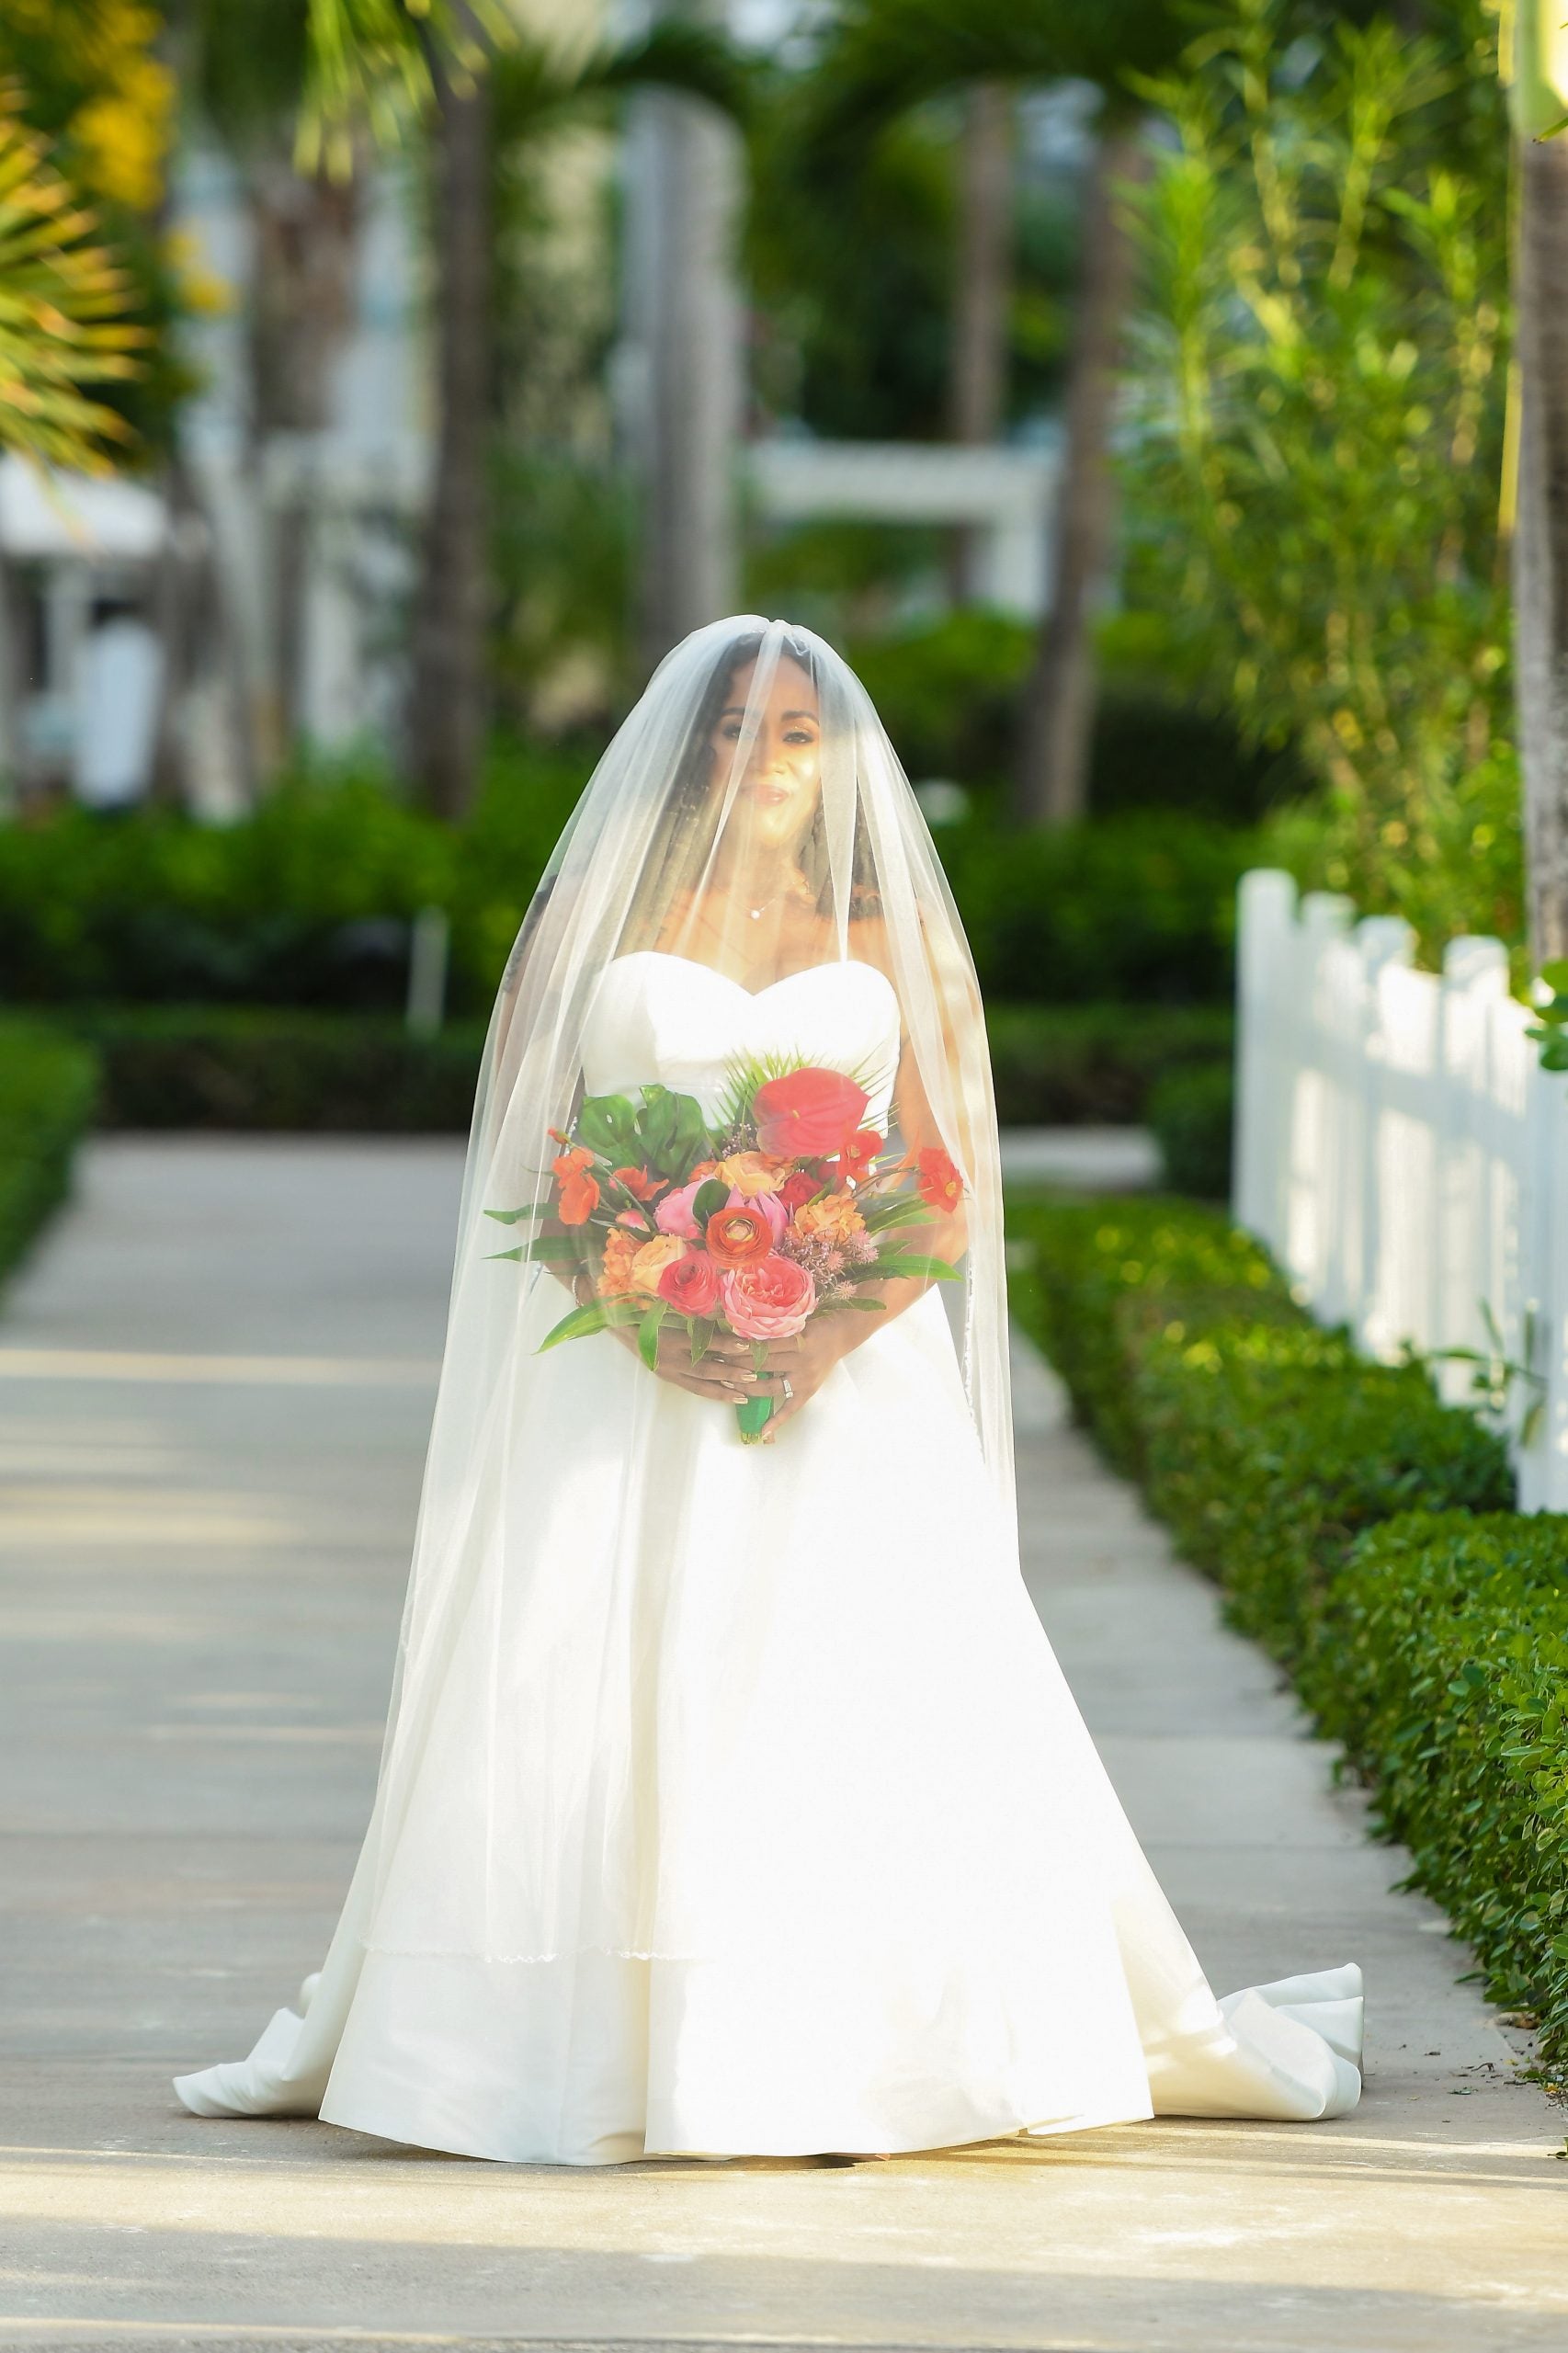 Bridal Bliss: Tomika And Michael Said 'I Do' In A Sunset Wedding On The Beach In Turks And Caicos